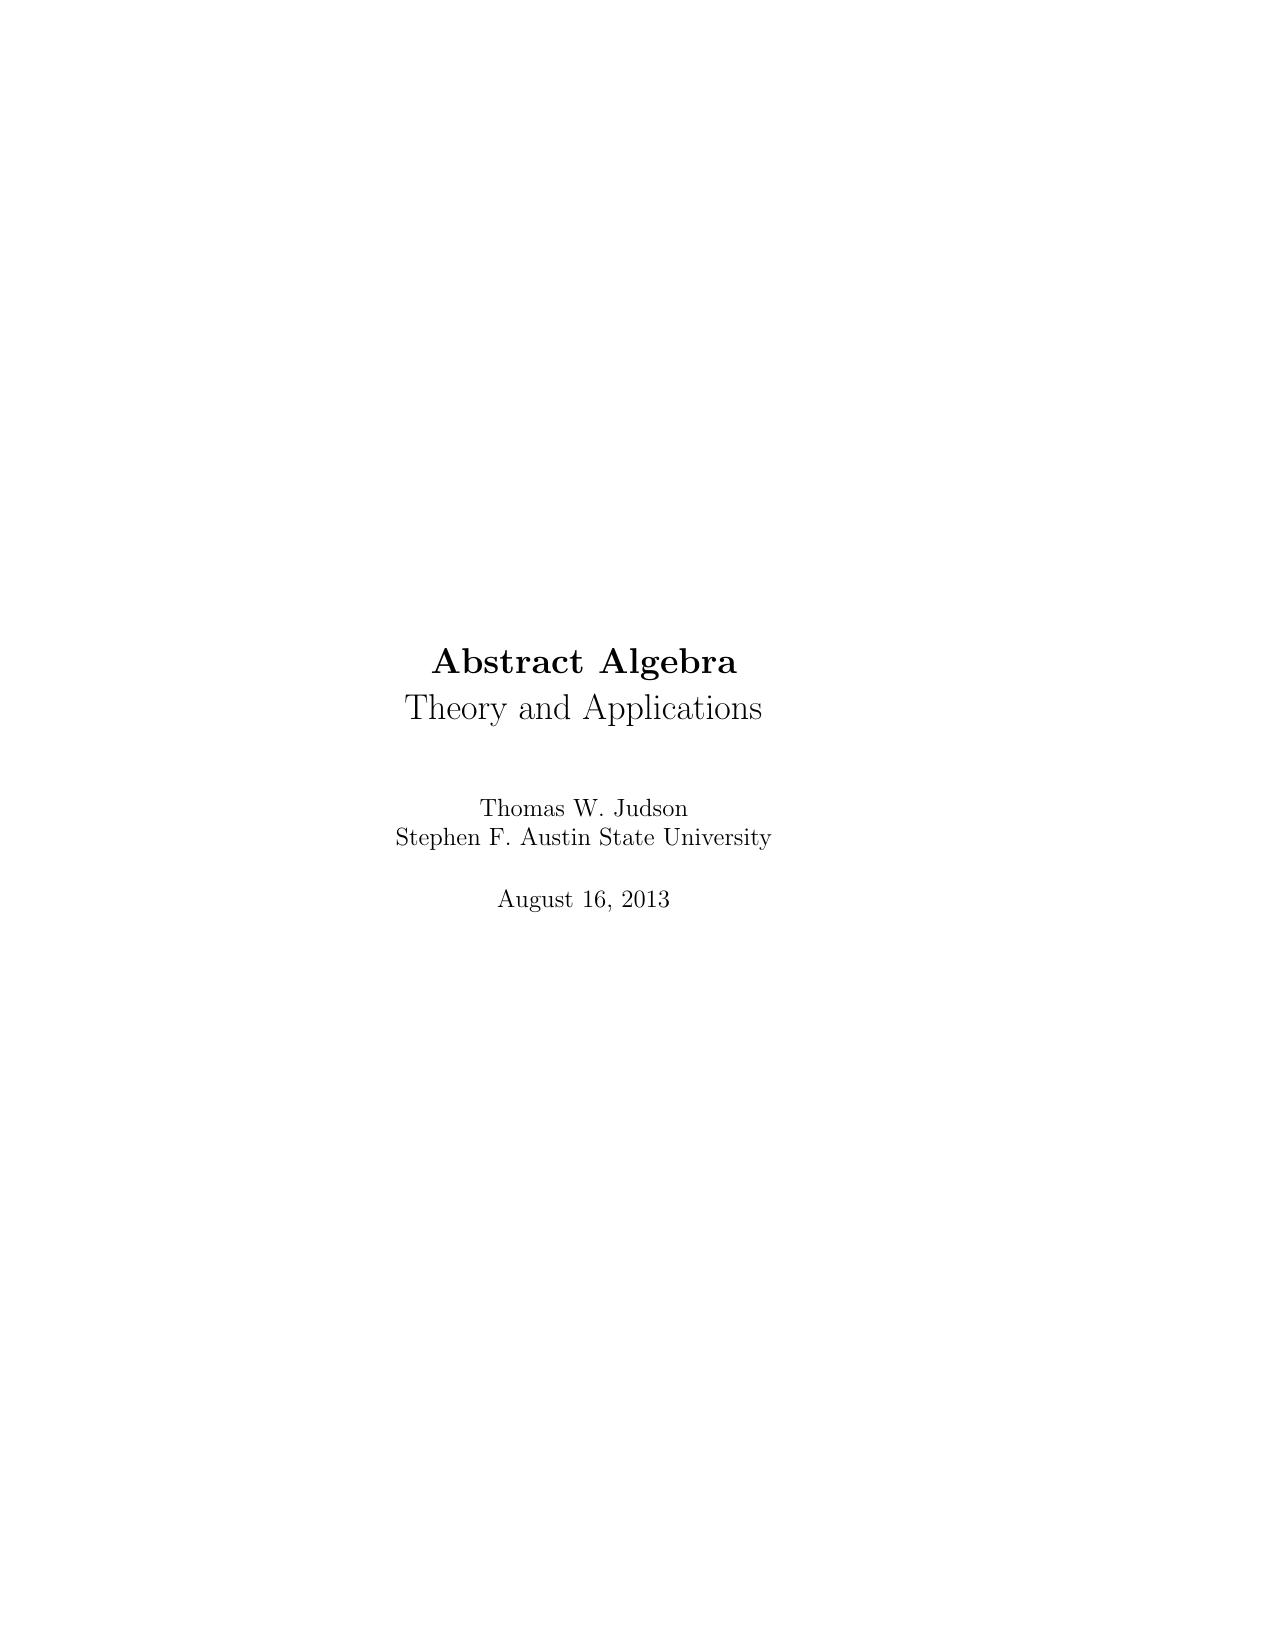 "Abstract Algebra: Theory and Applications"